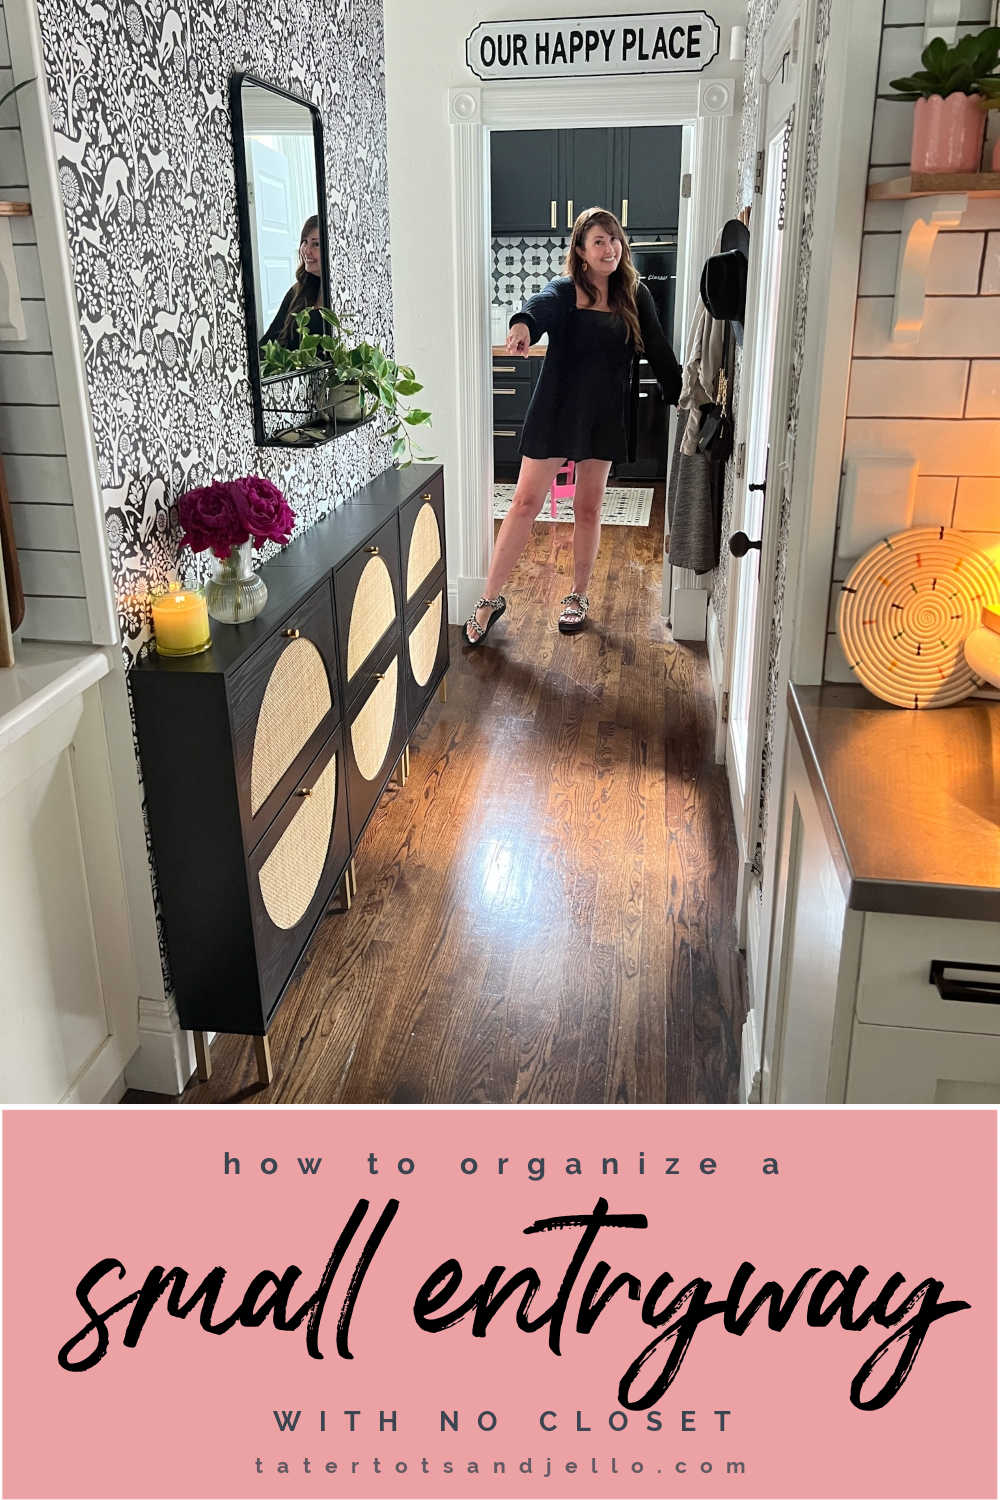 How to Organize a No-Closet Entryway. Tired of shoes and coats cluttering up your no closet entryway? Make your cluttered entryway efficient and beautiful in one day.